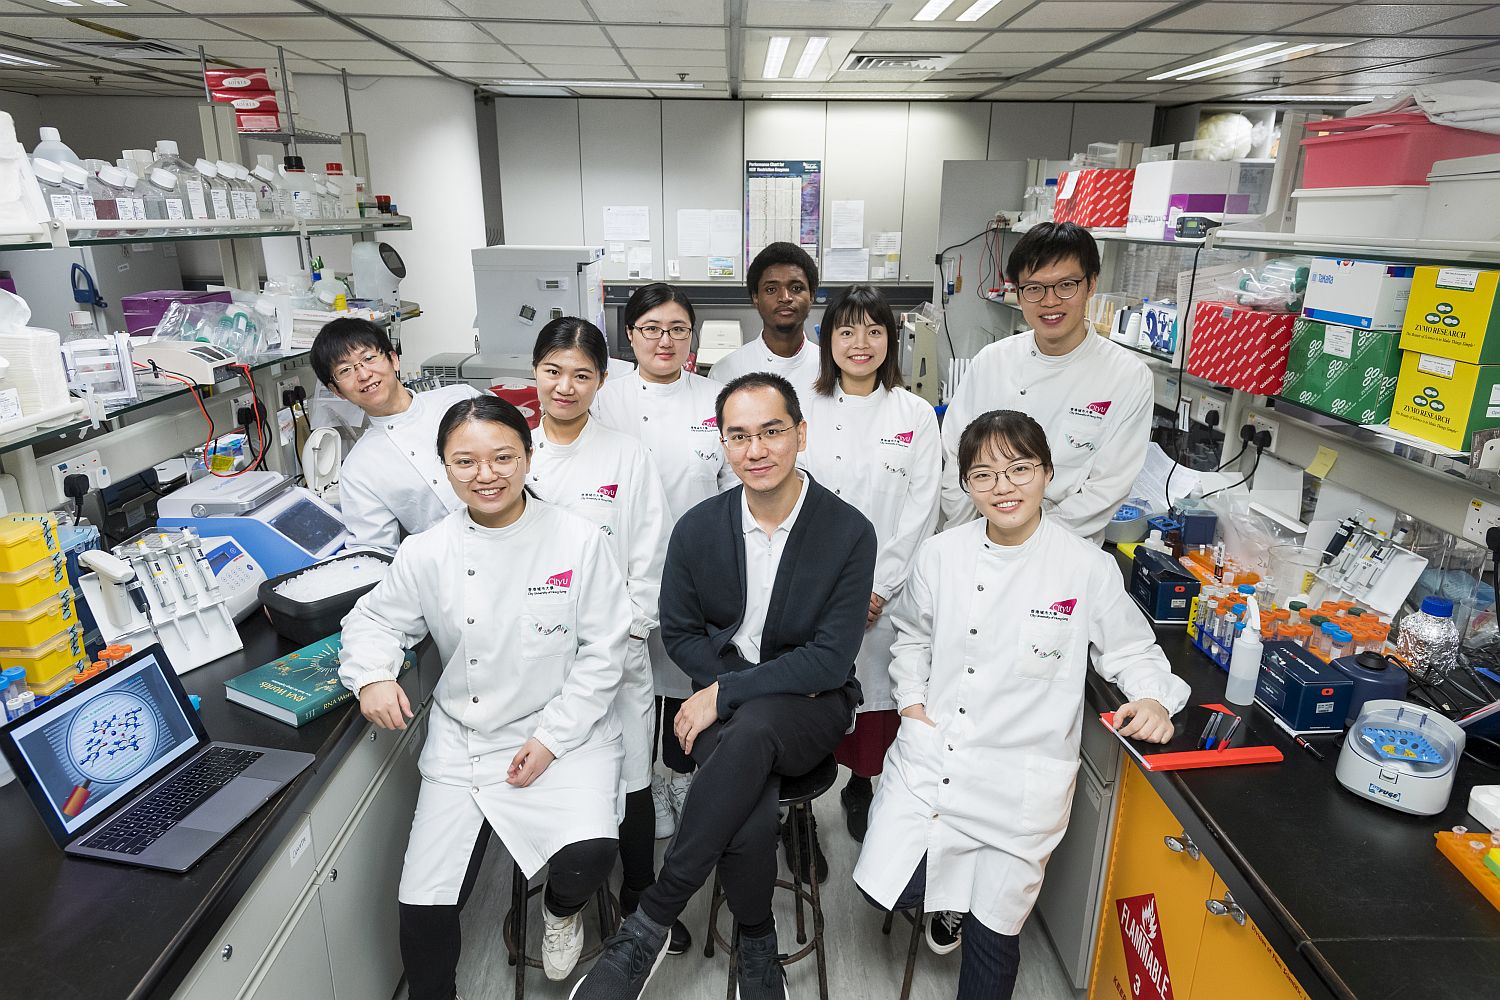 Dr Kwok and members of his laboratory research team.